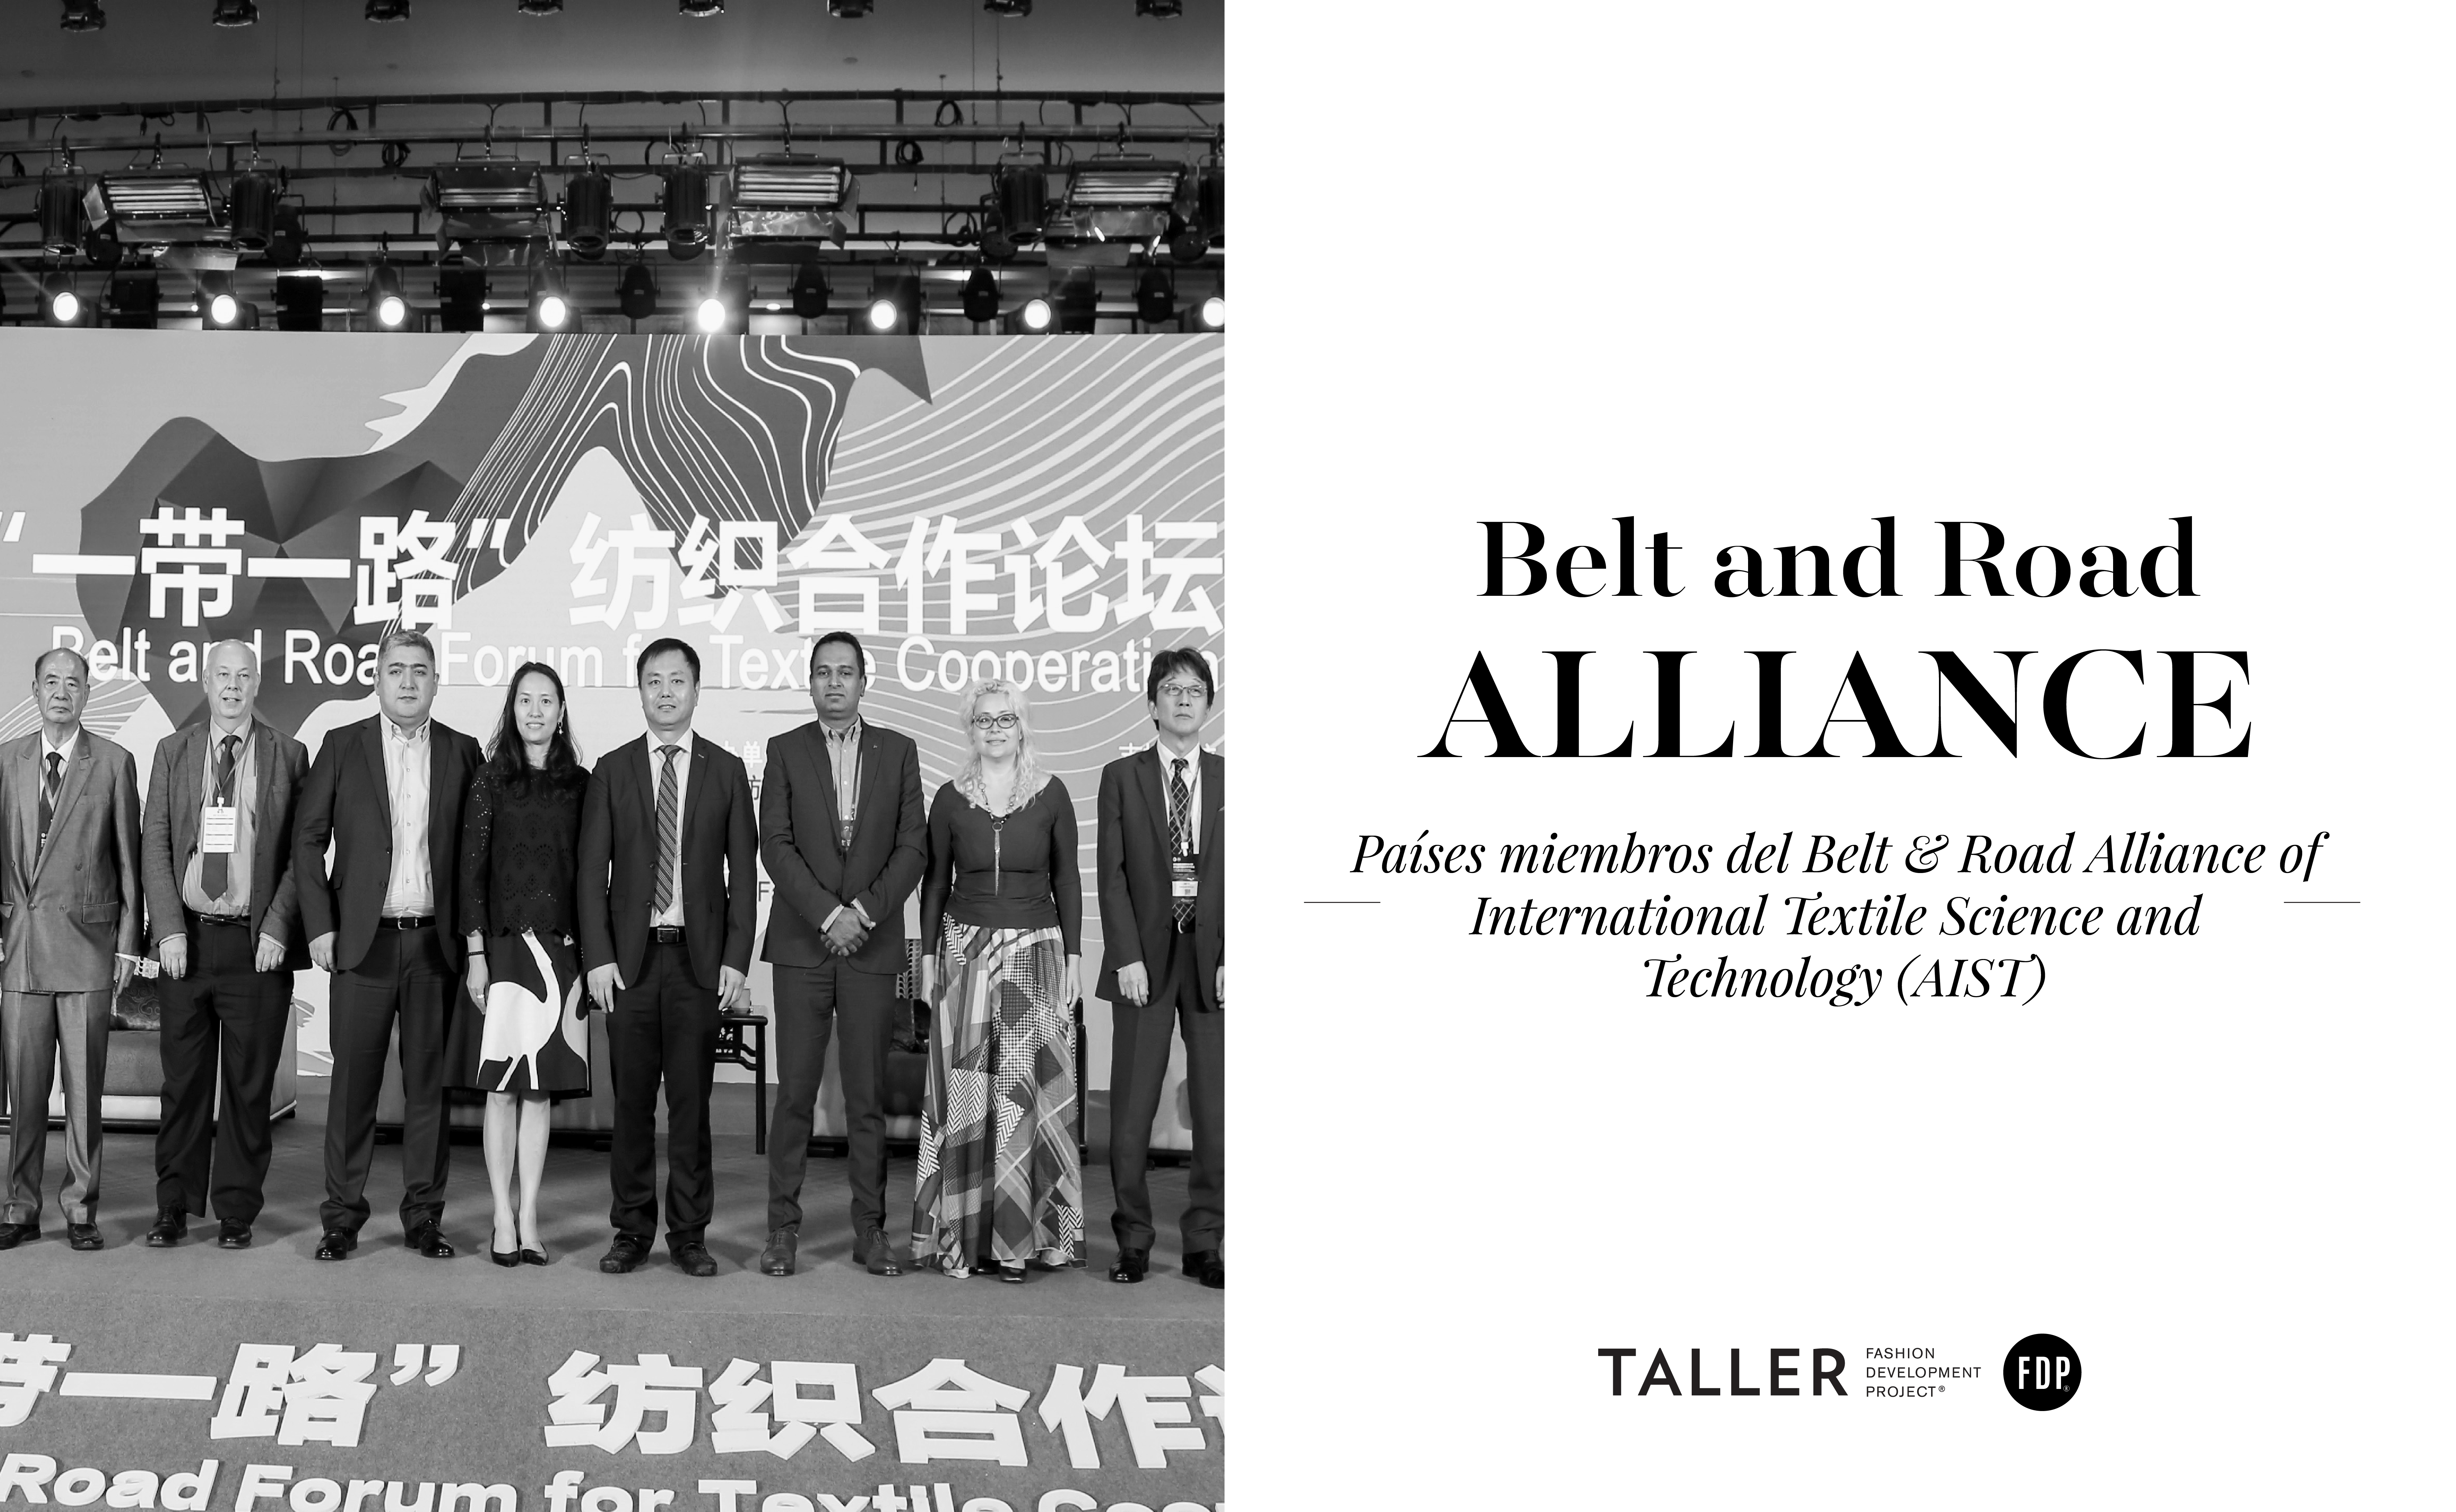 ¿Cuáles son los países miembros del Belt & Road Alliance of International Textile Science and Technology (AIST)? 